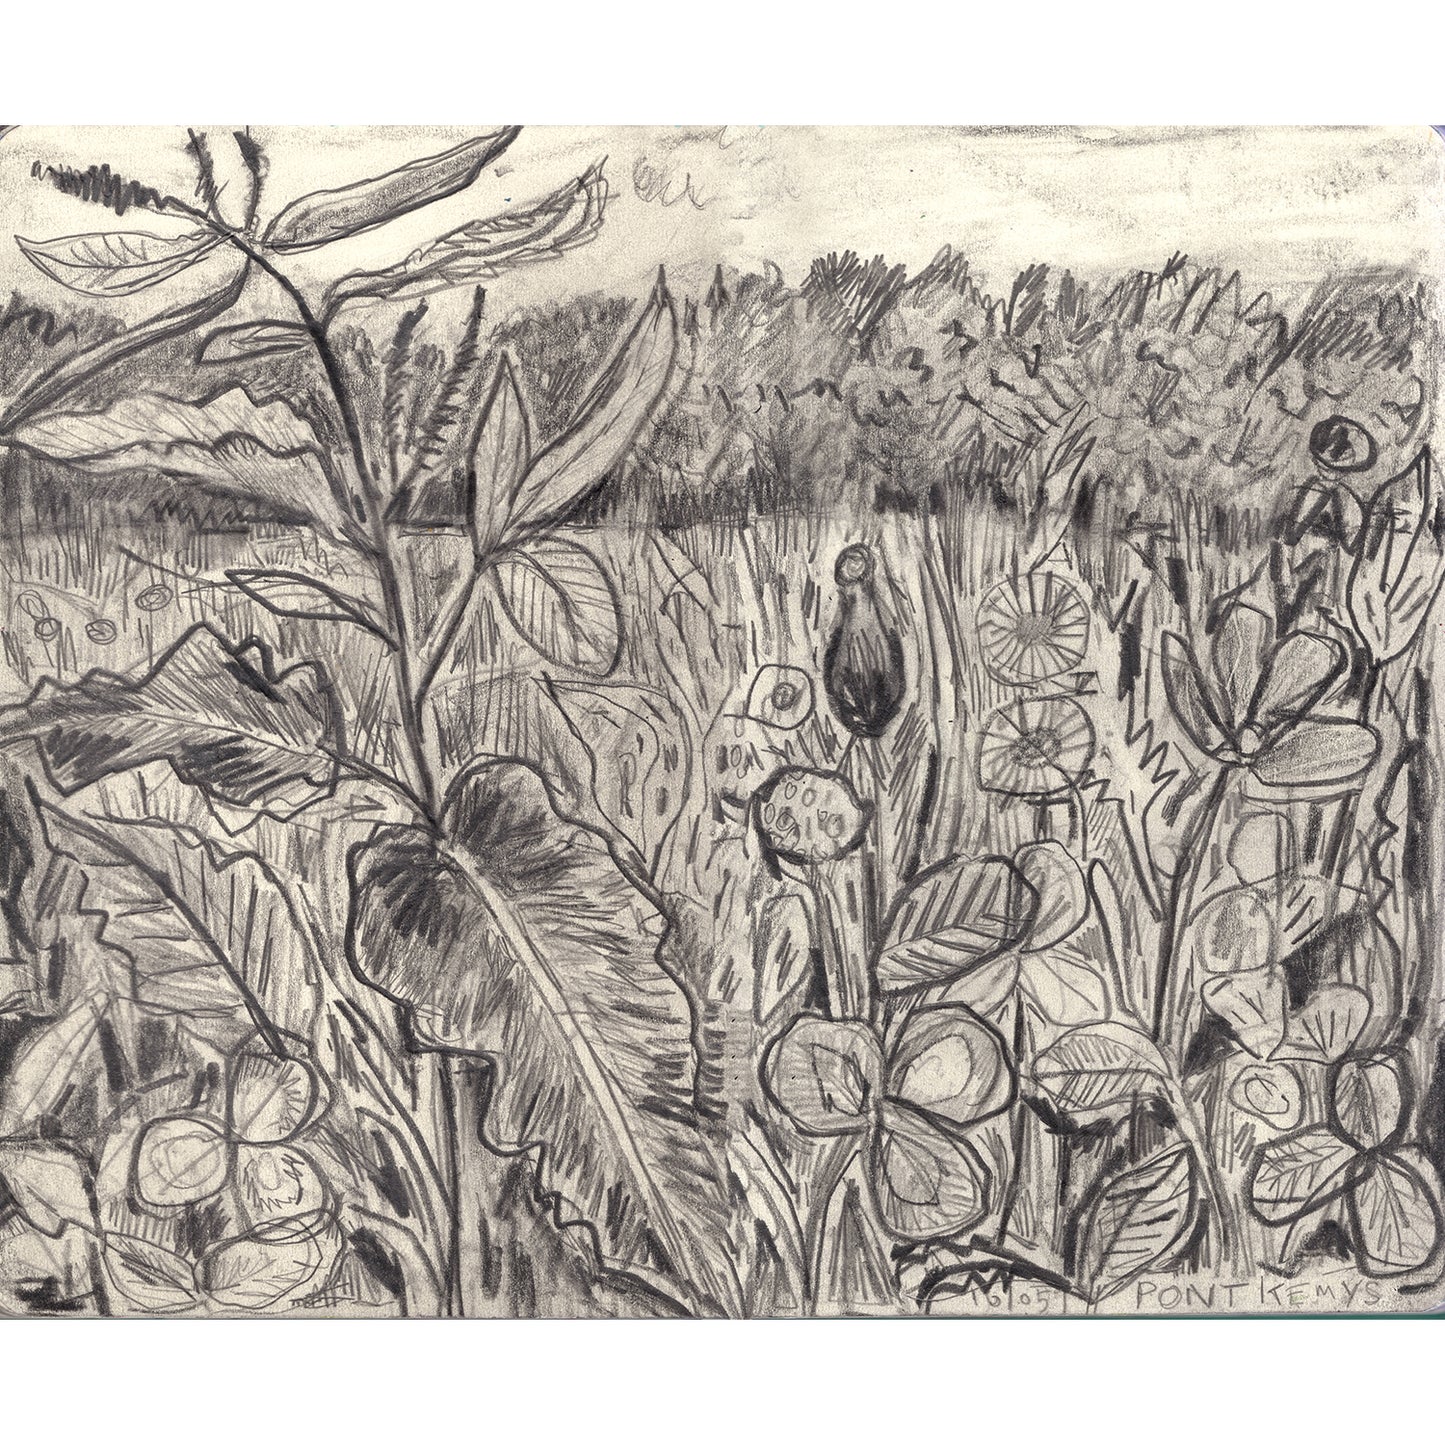 Meadow in Pont Kemys , Wales pencll